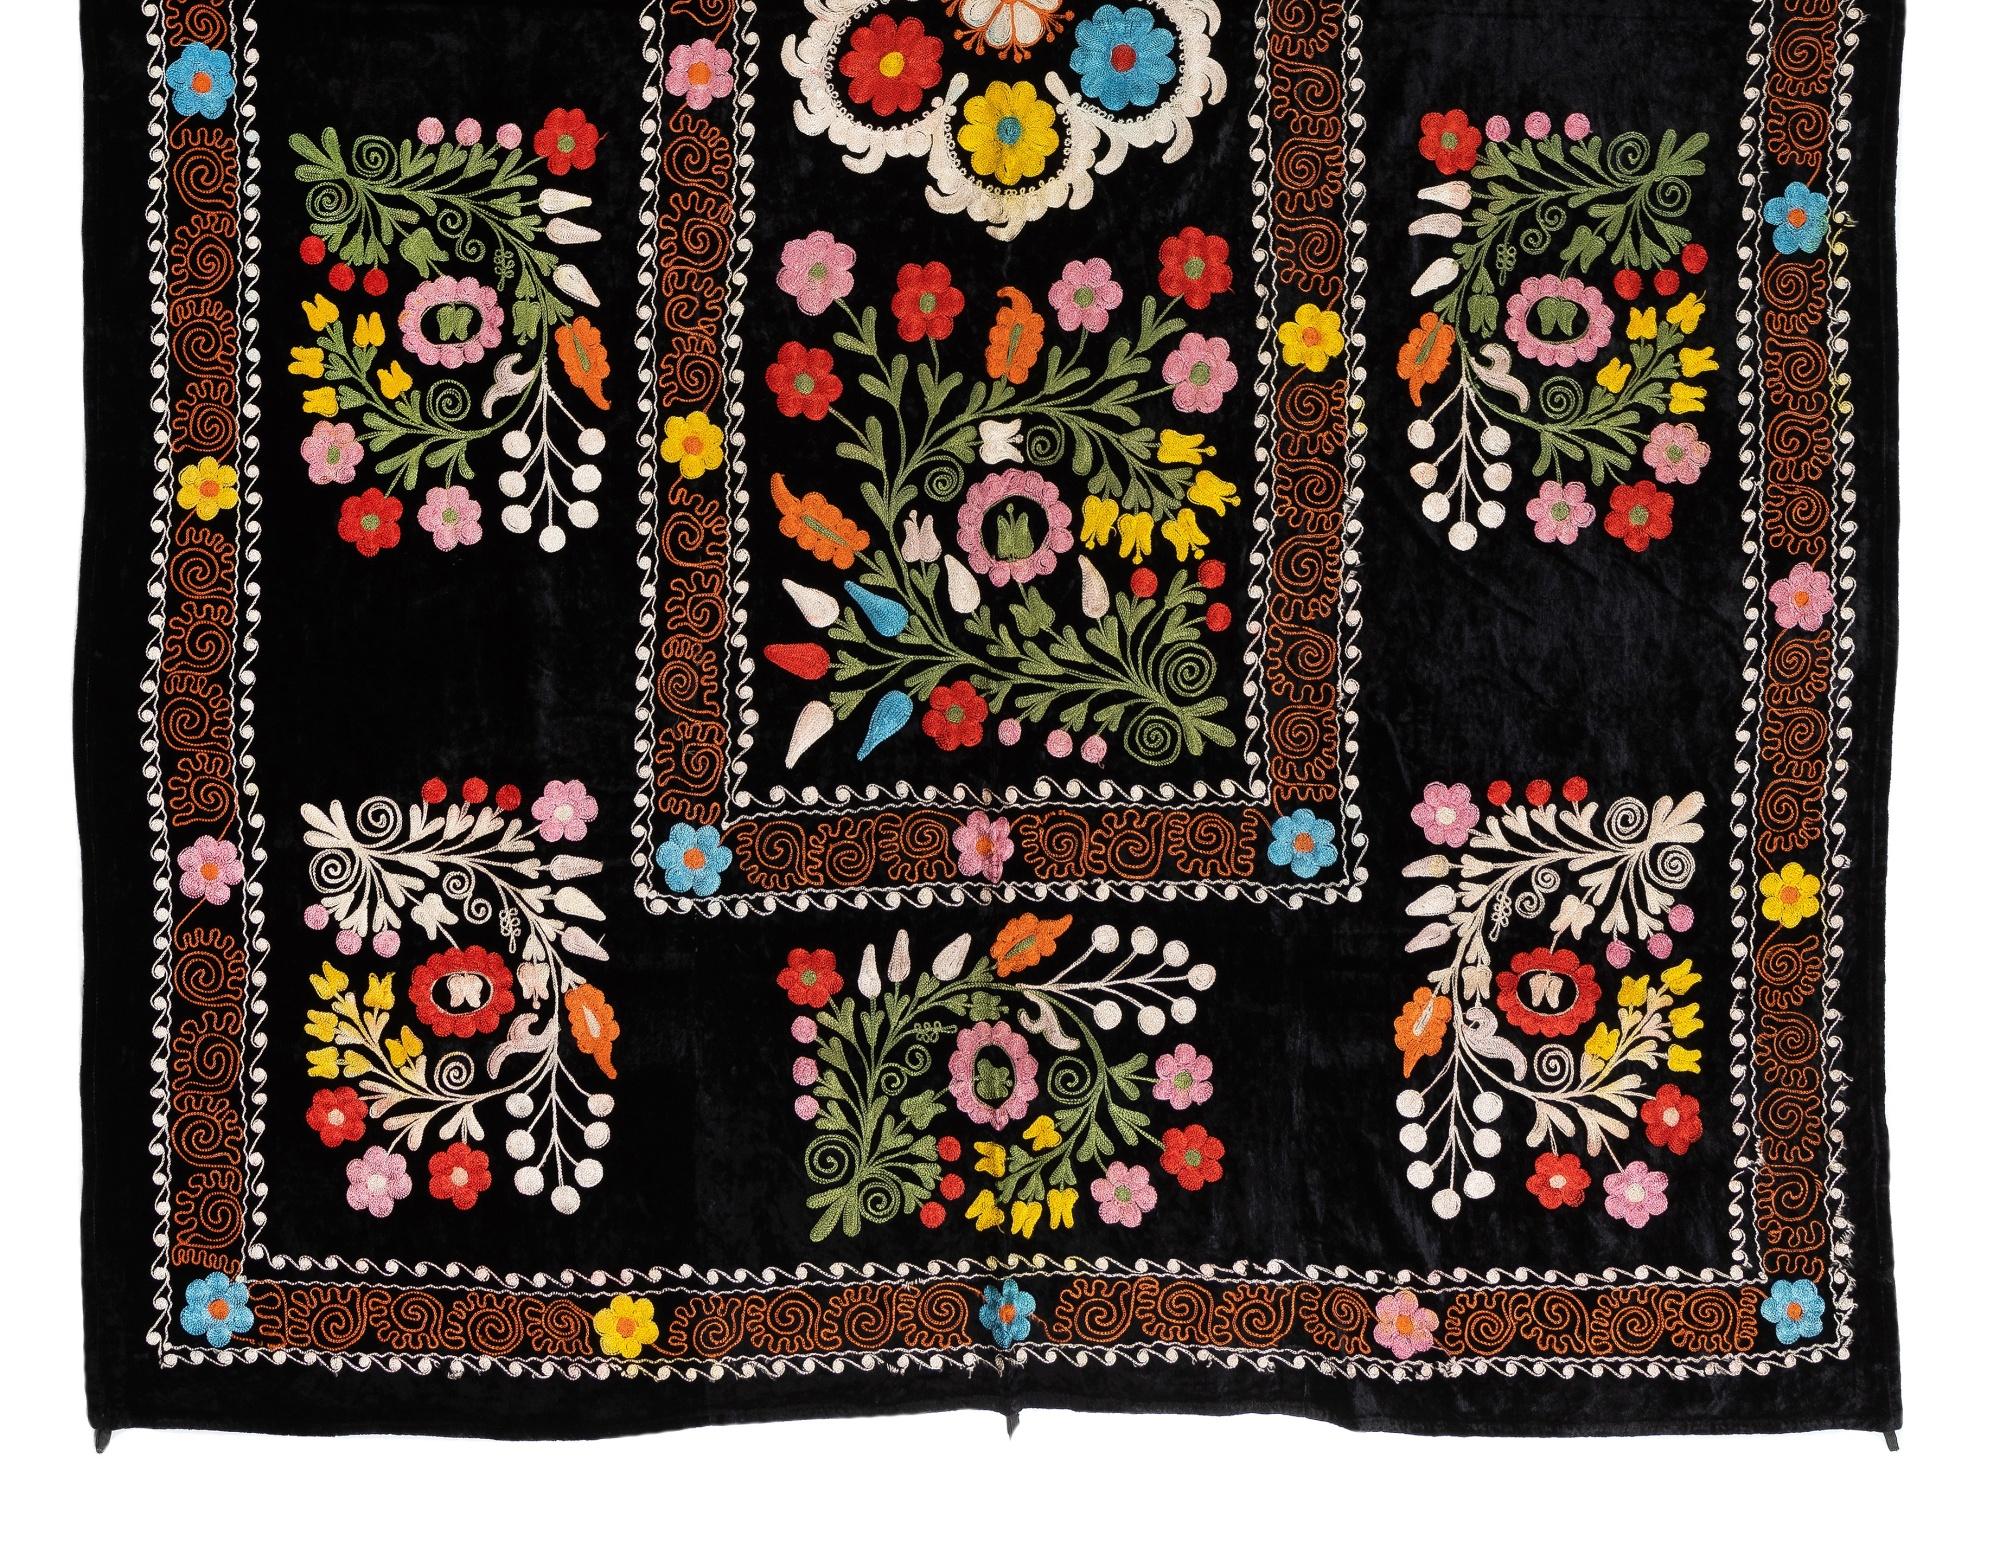 Suzani 4.2x6.6 Ft Silk Embroidered Bed Cover, Black Tablecloth, Colorful Wall Hanging For Sale